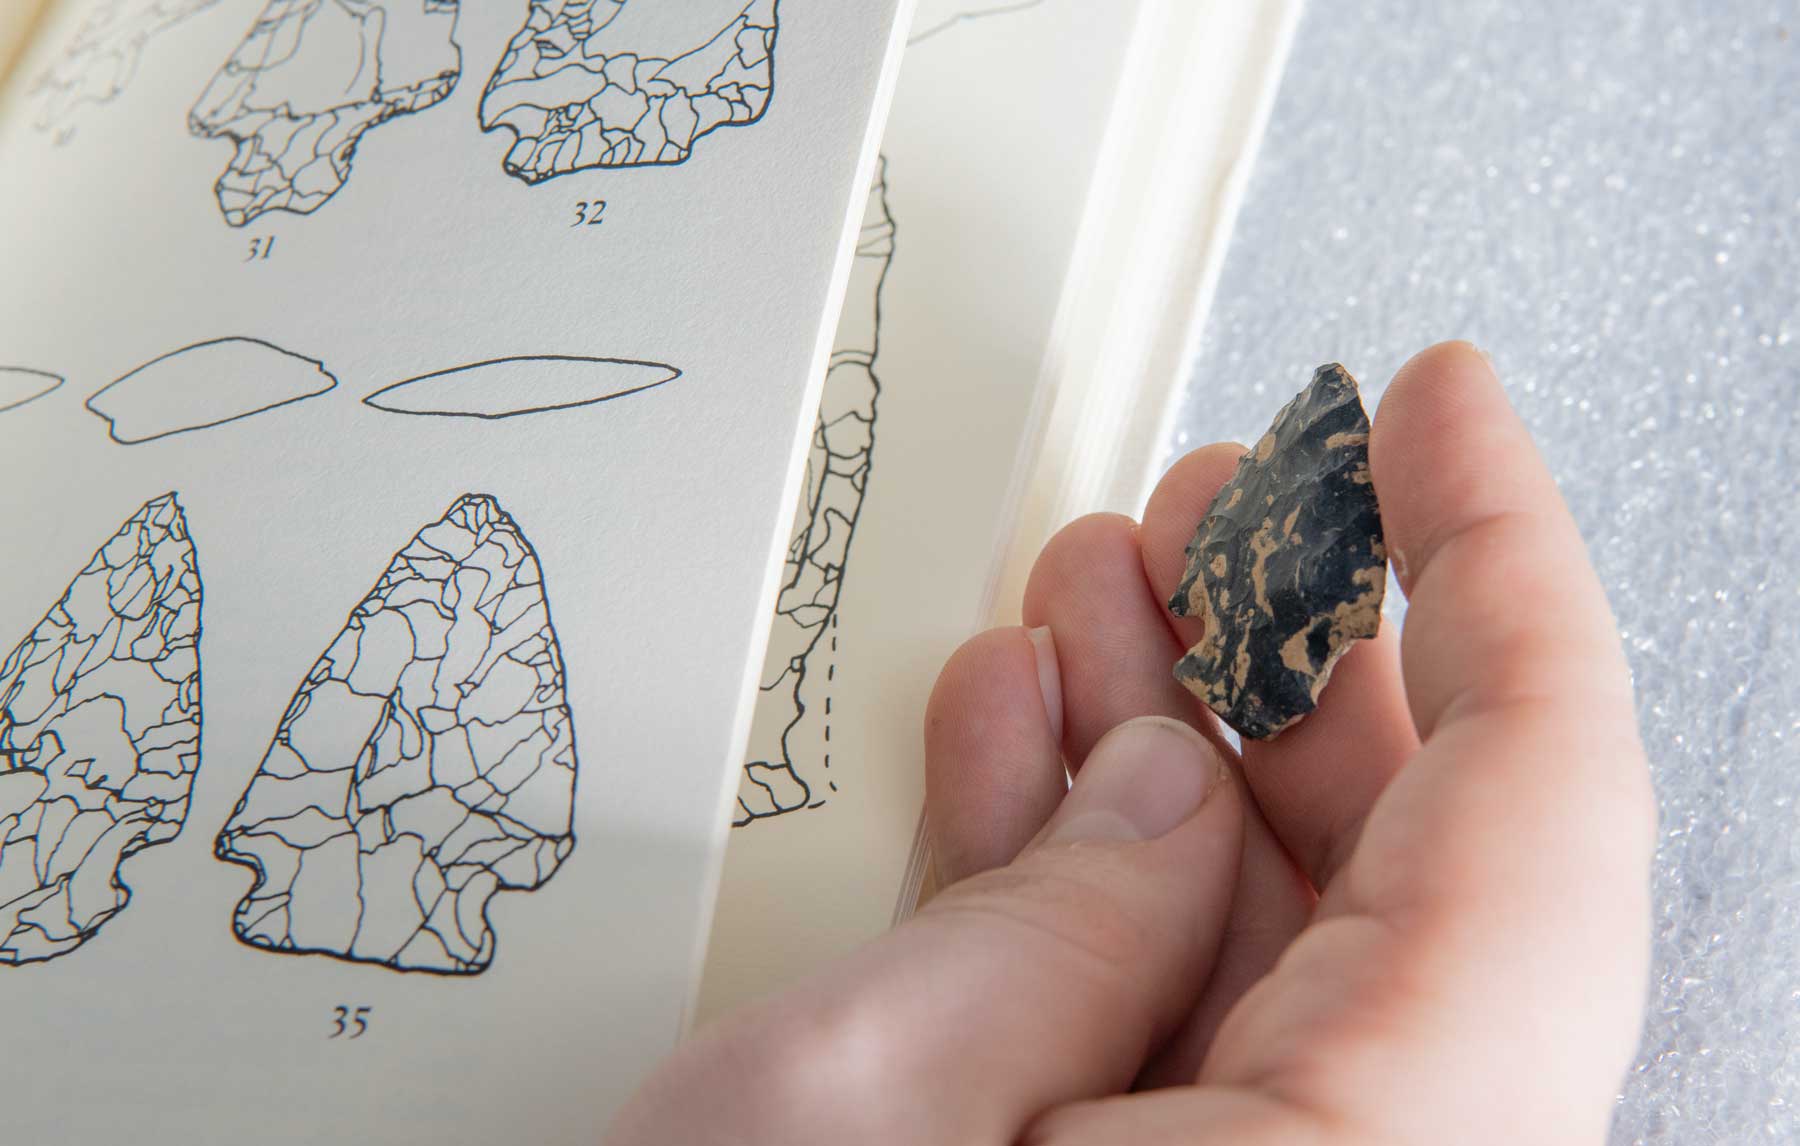 Image of an arrowhead identification book next to a stone arrowhead in a person's hand